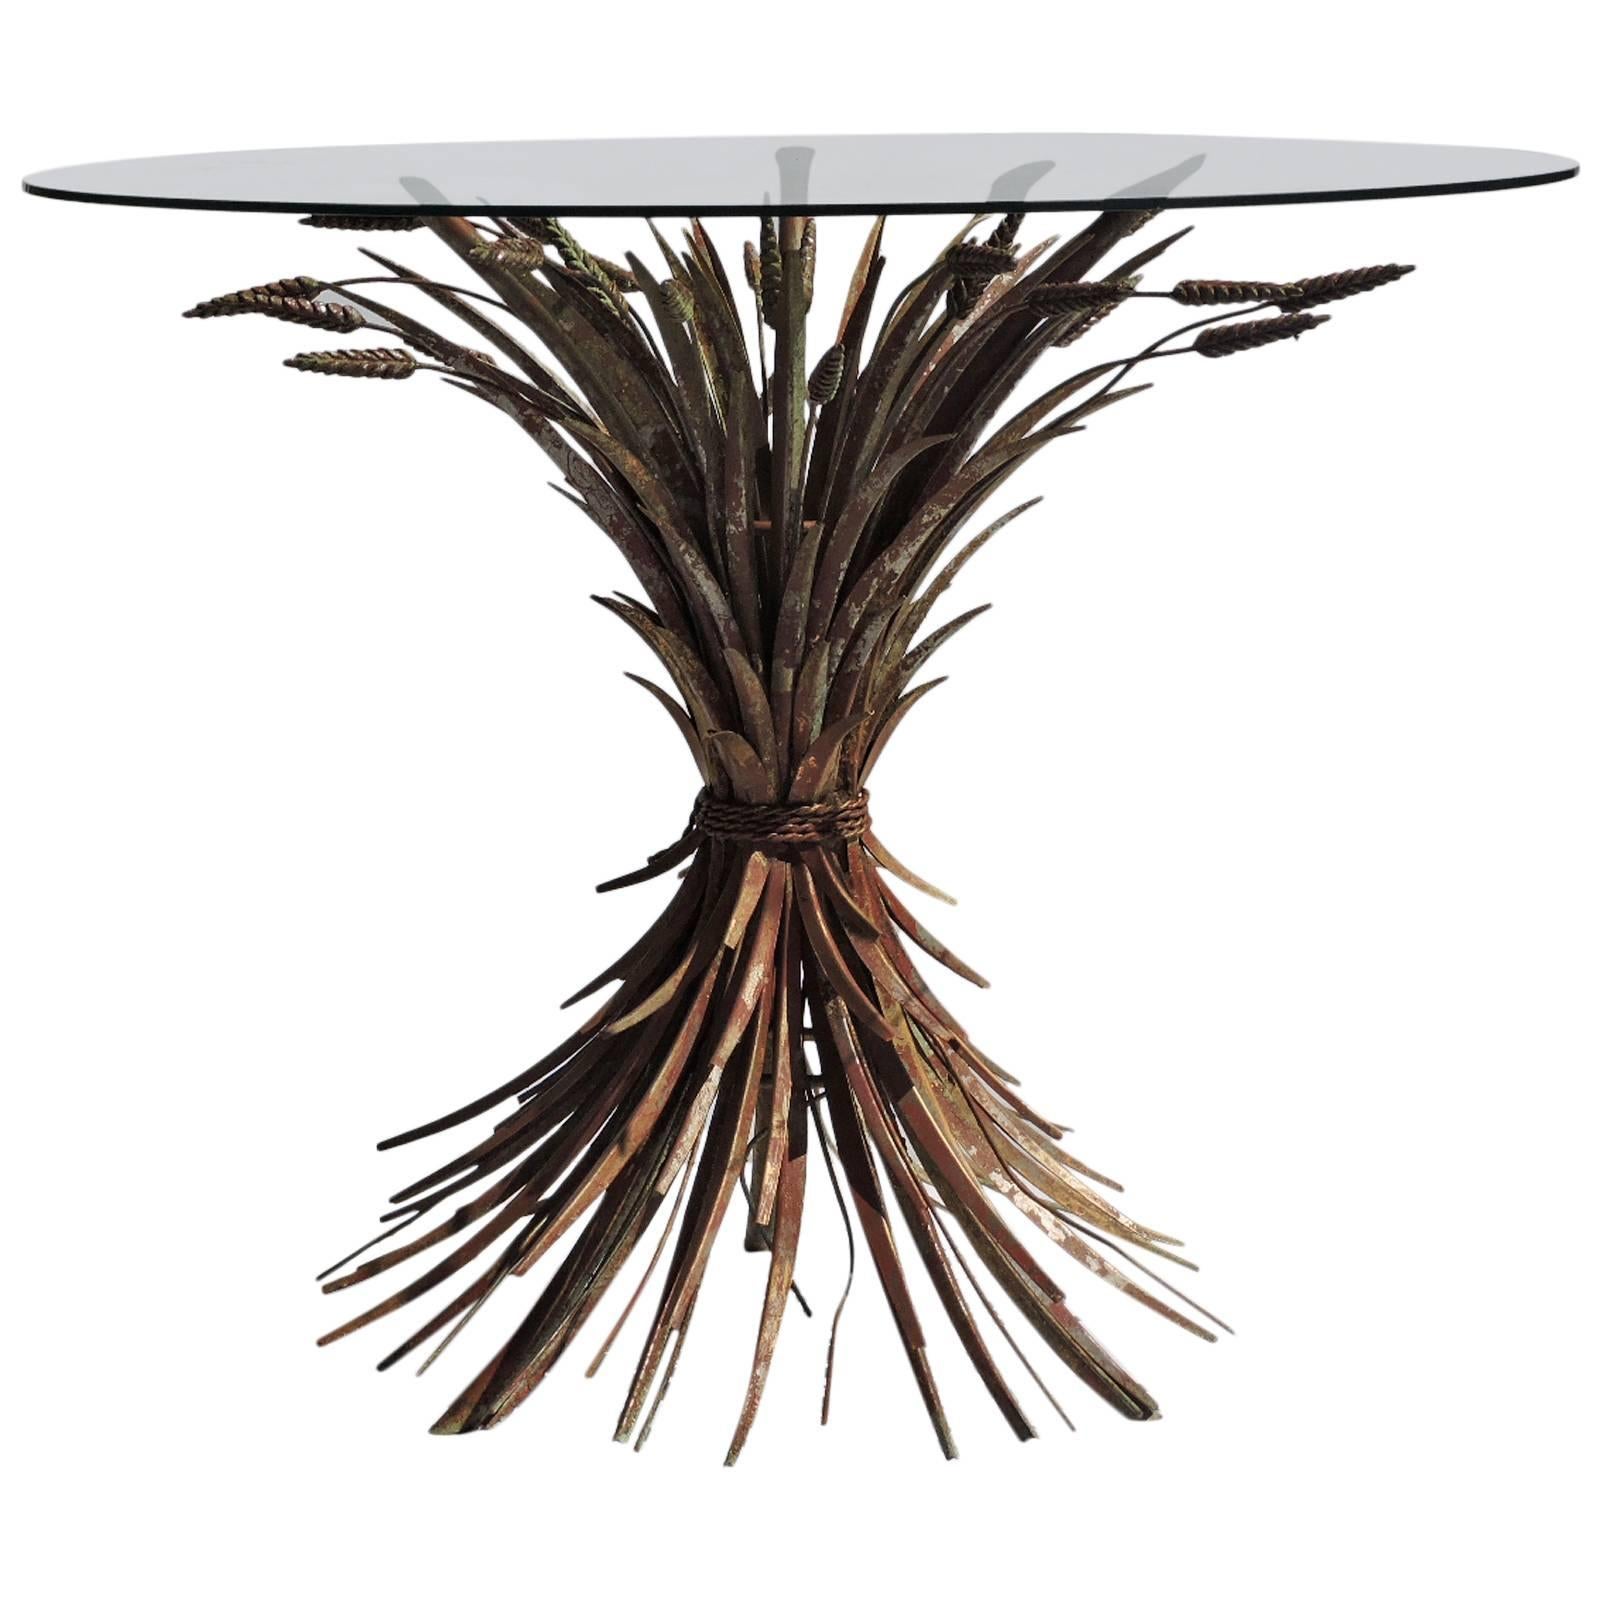 1960s Italian Tole Metal Sheaf of Wheat Dining Table